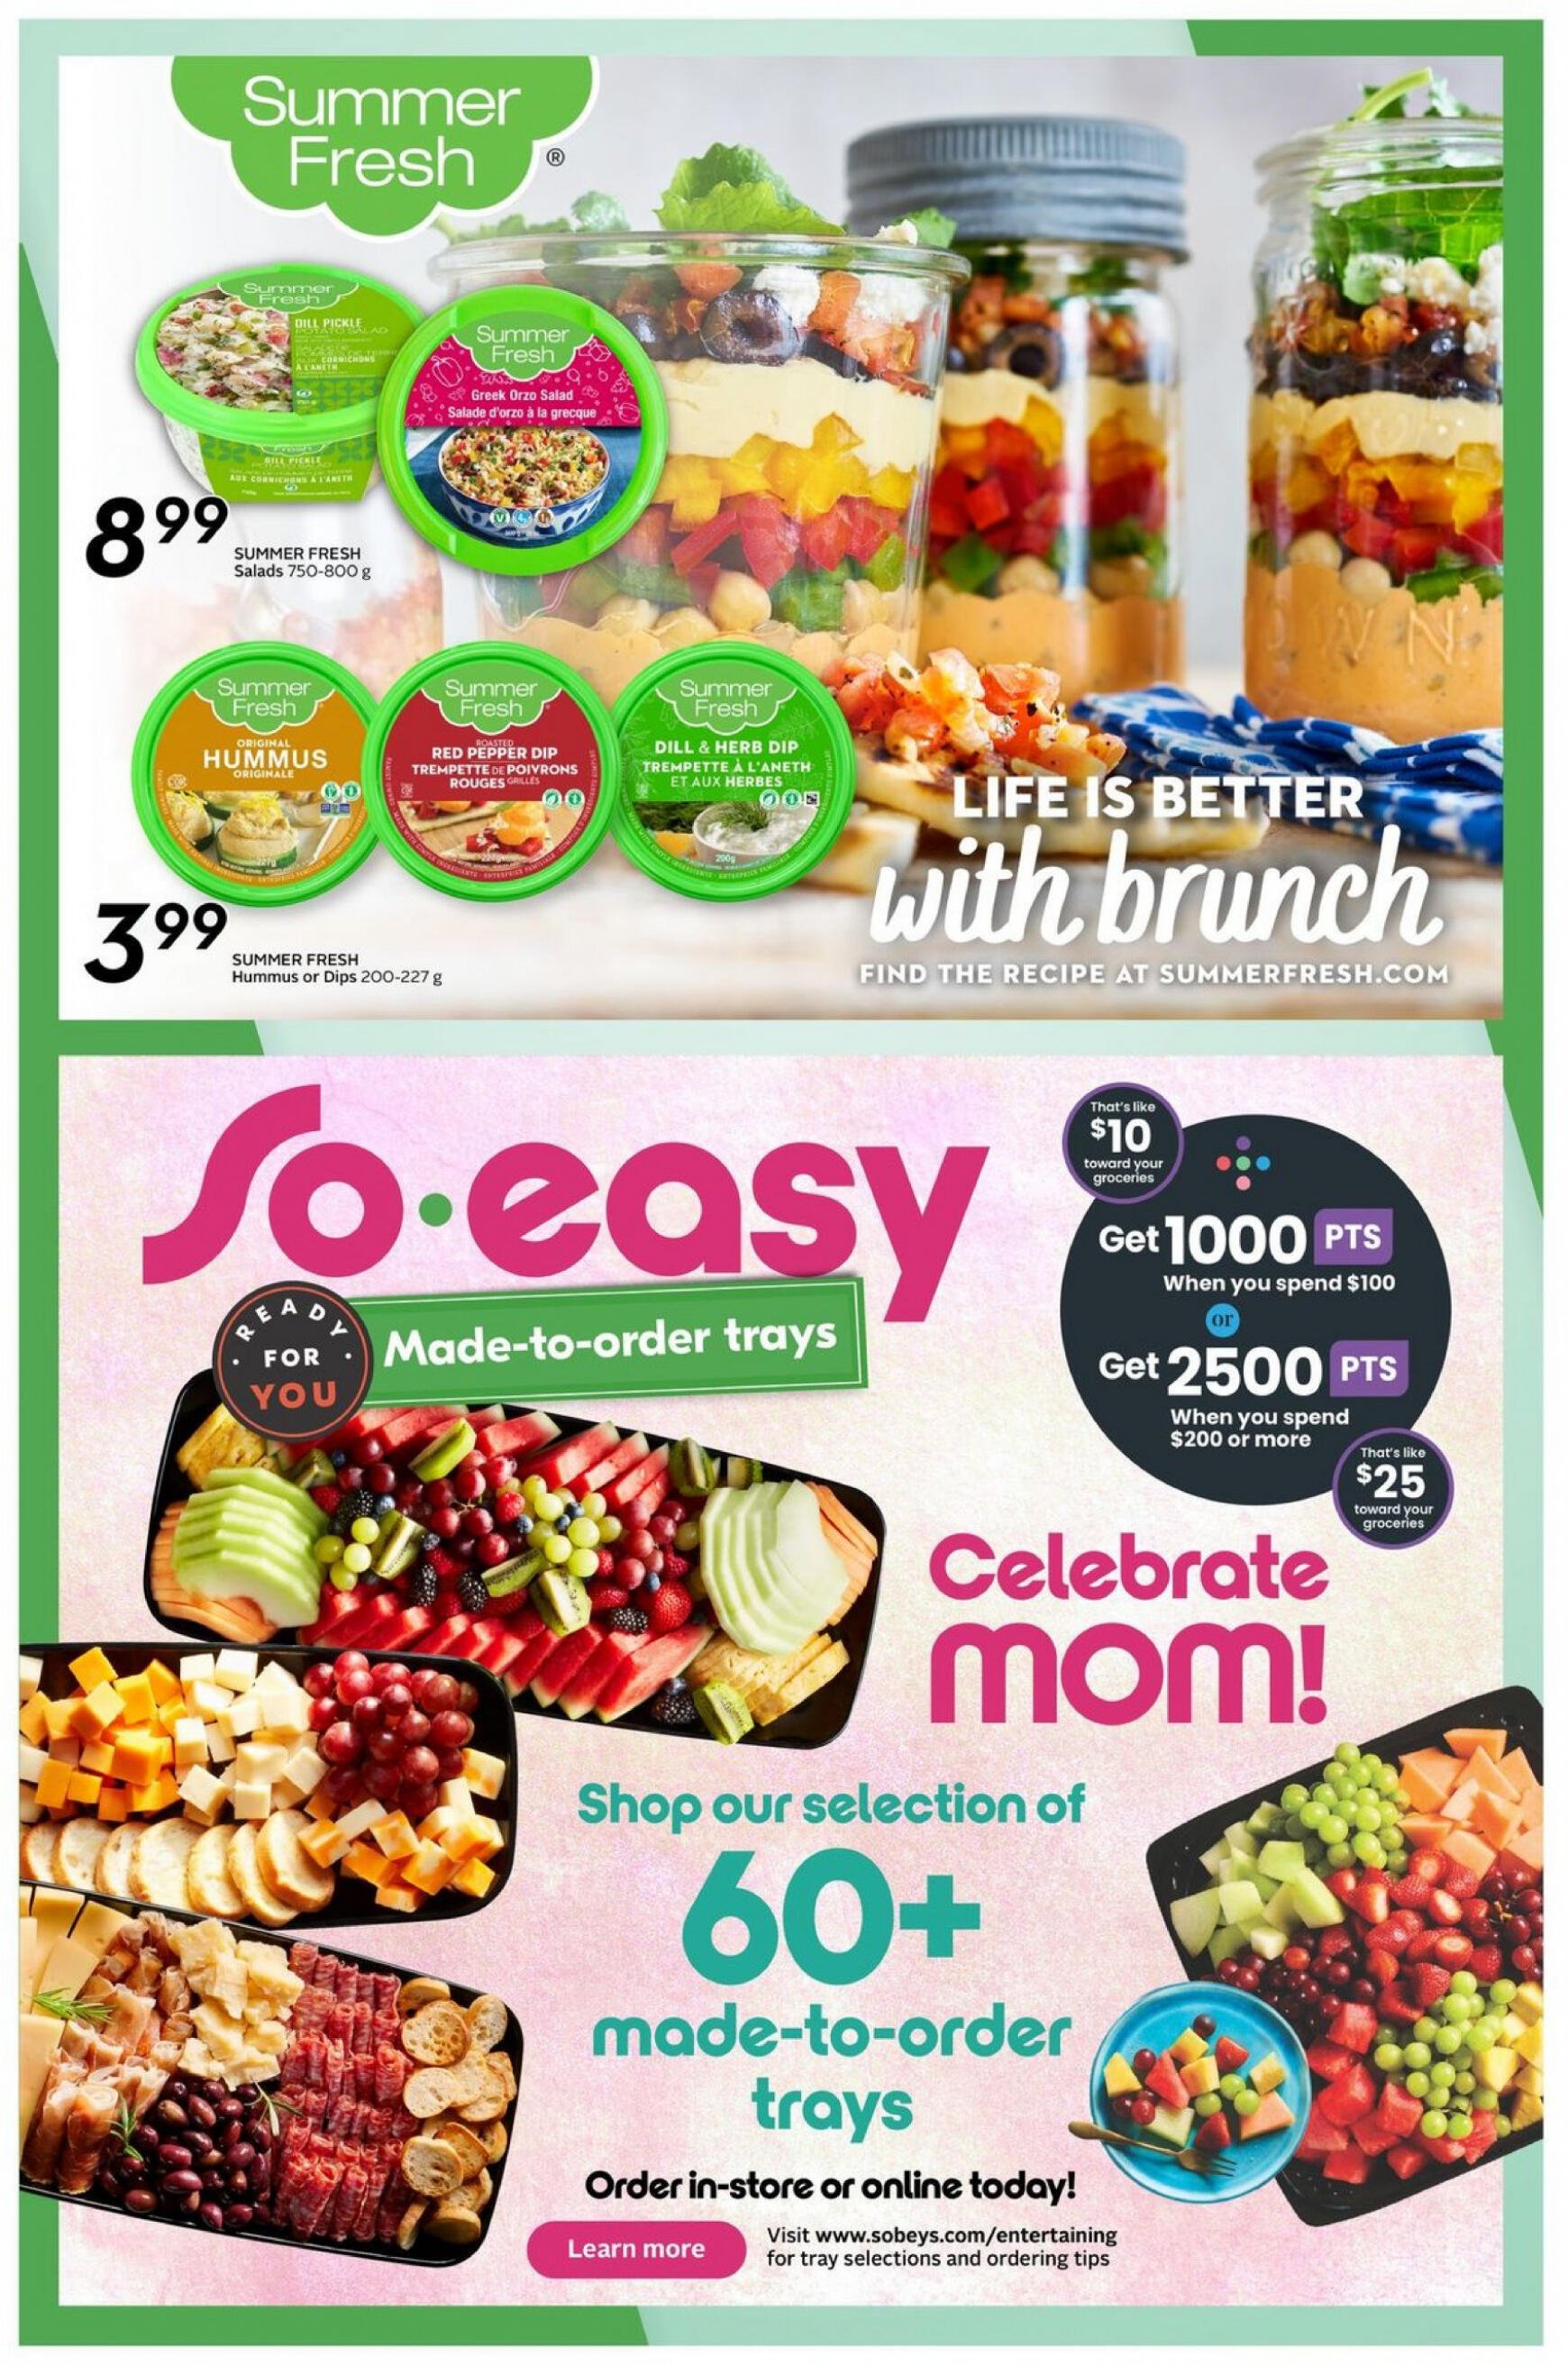 sobeys - Sobeys - Weekly Flyer - Ontario flyer current 02.05. - 08.05. - page: 10